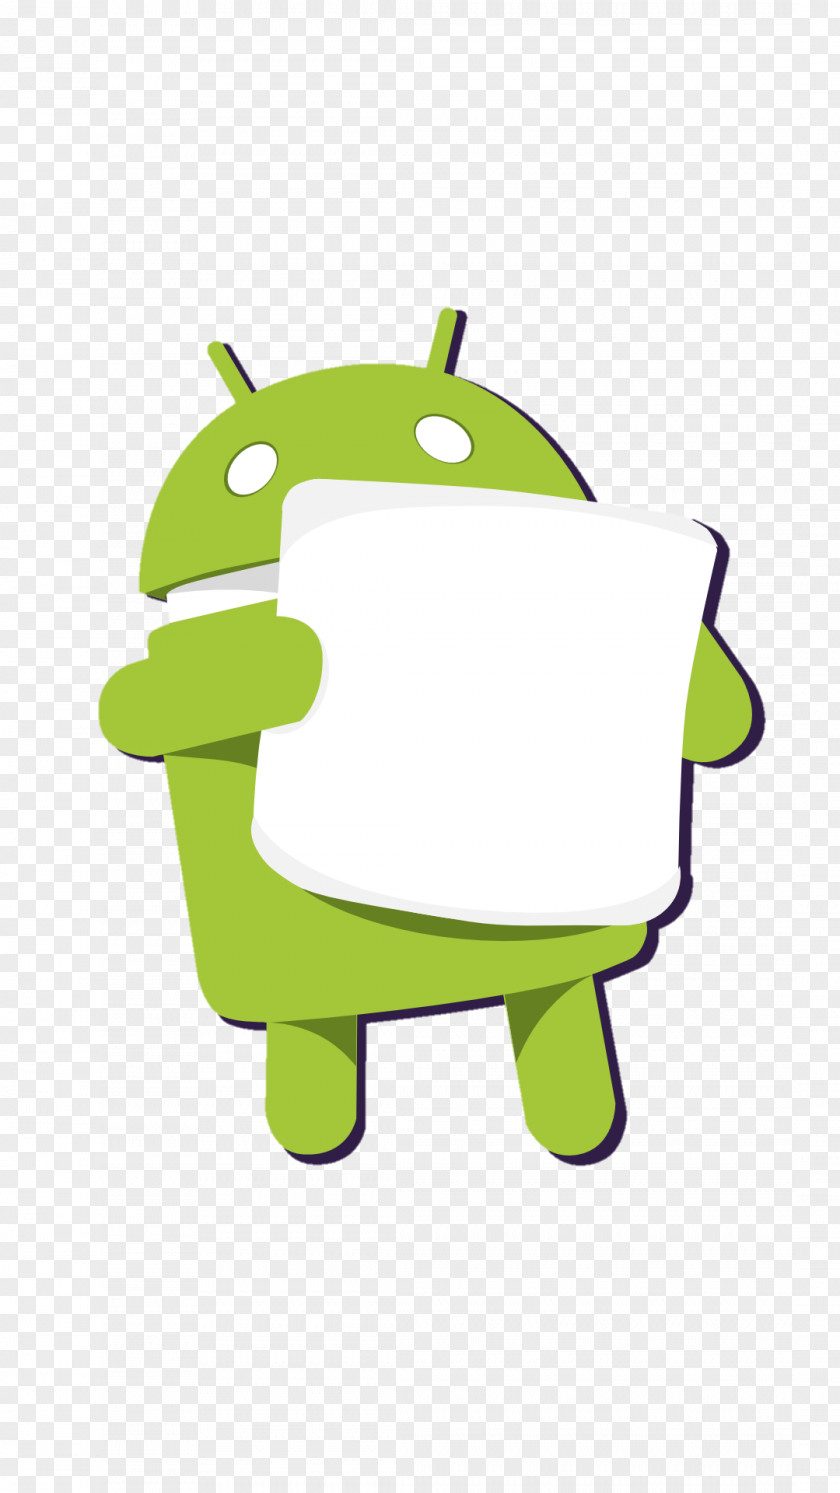 Android Samsung Galaxy S III Marshmallow Firmware PNG